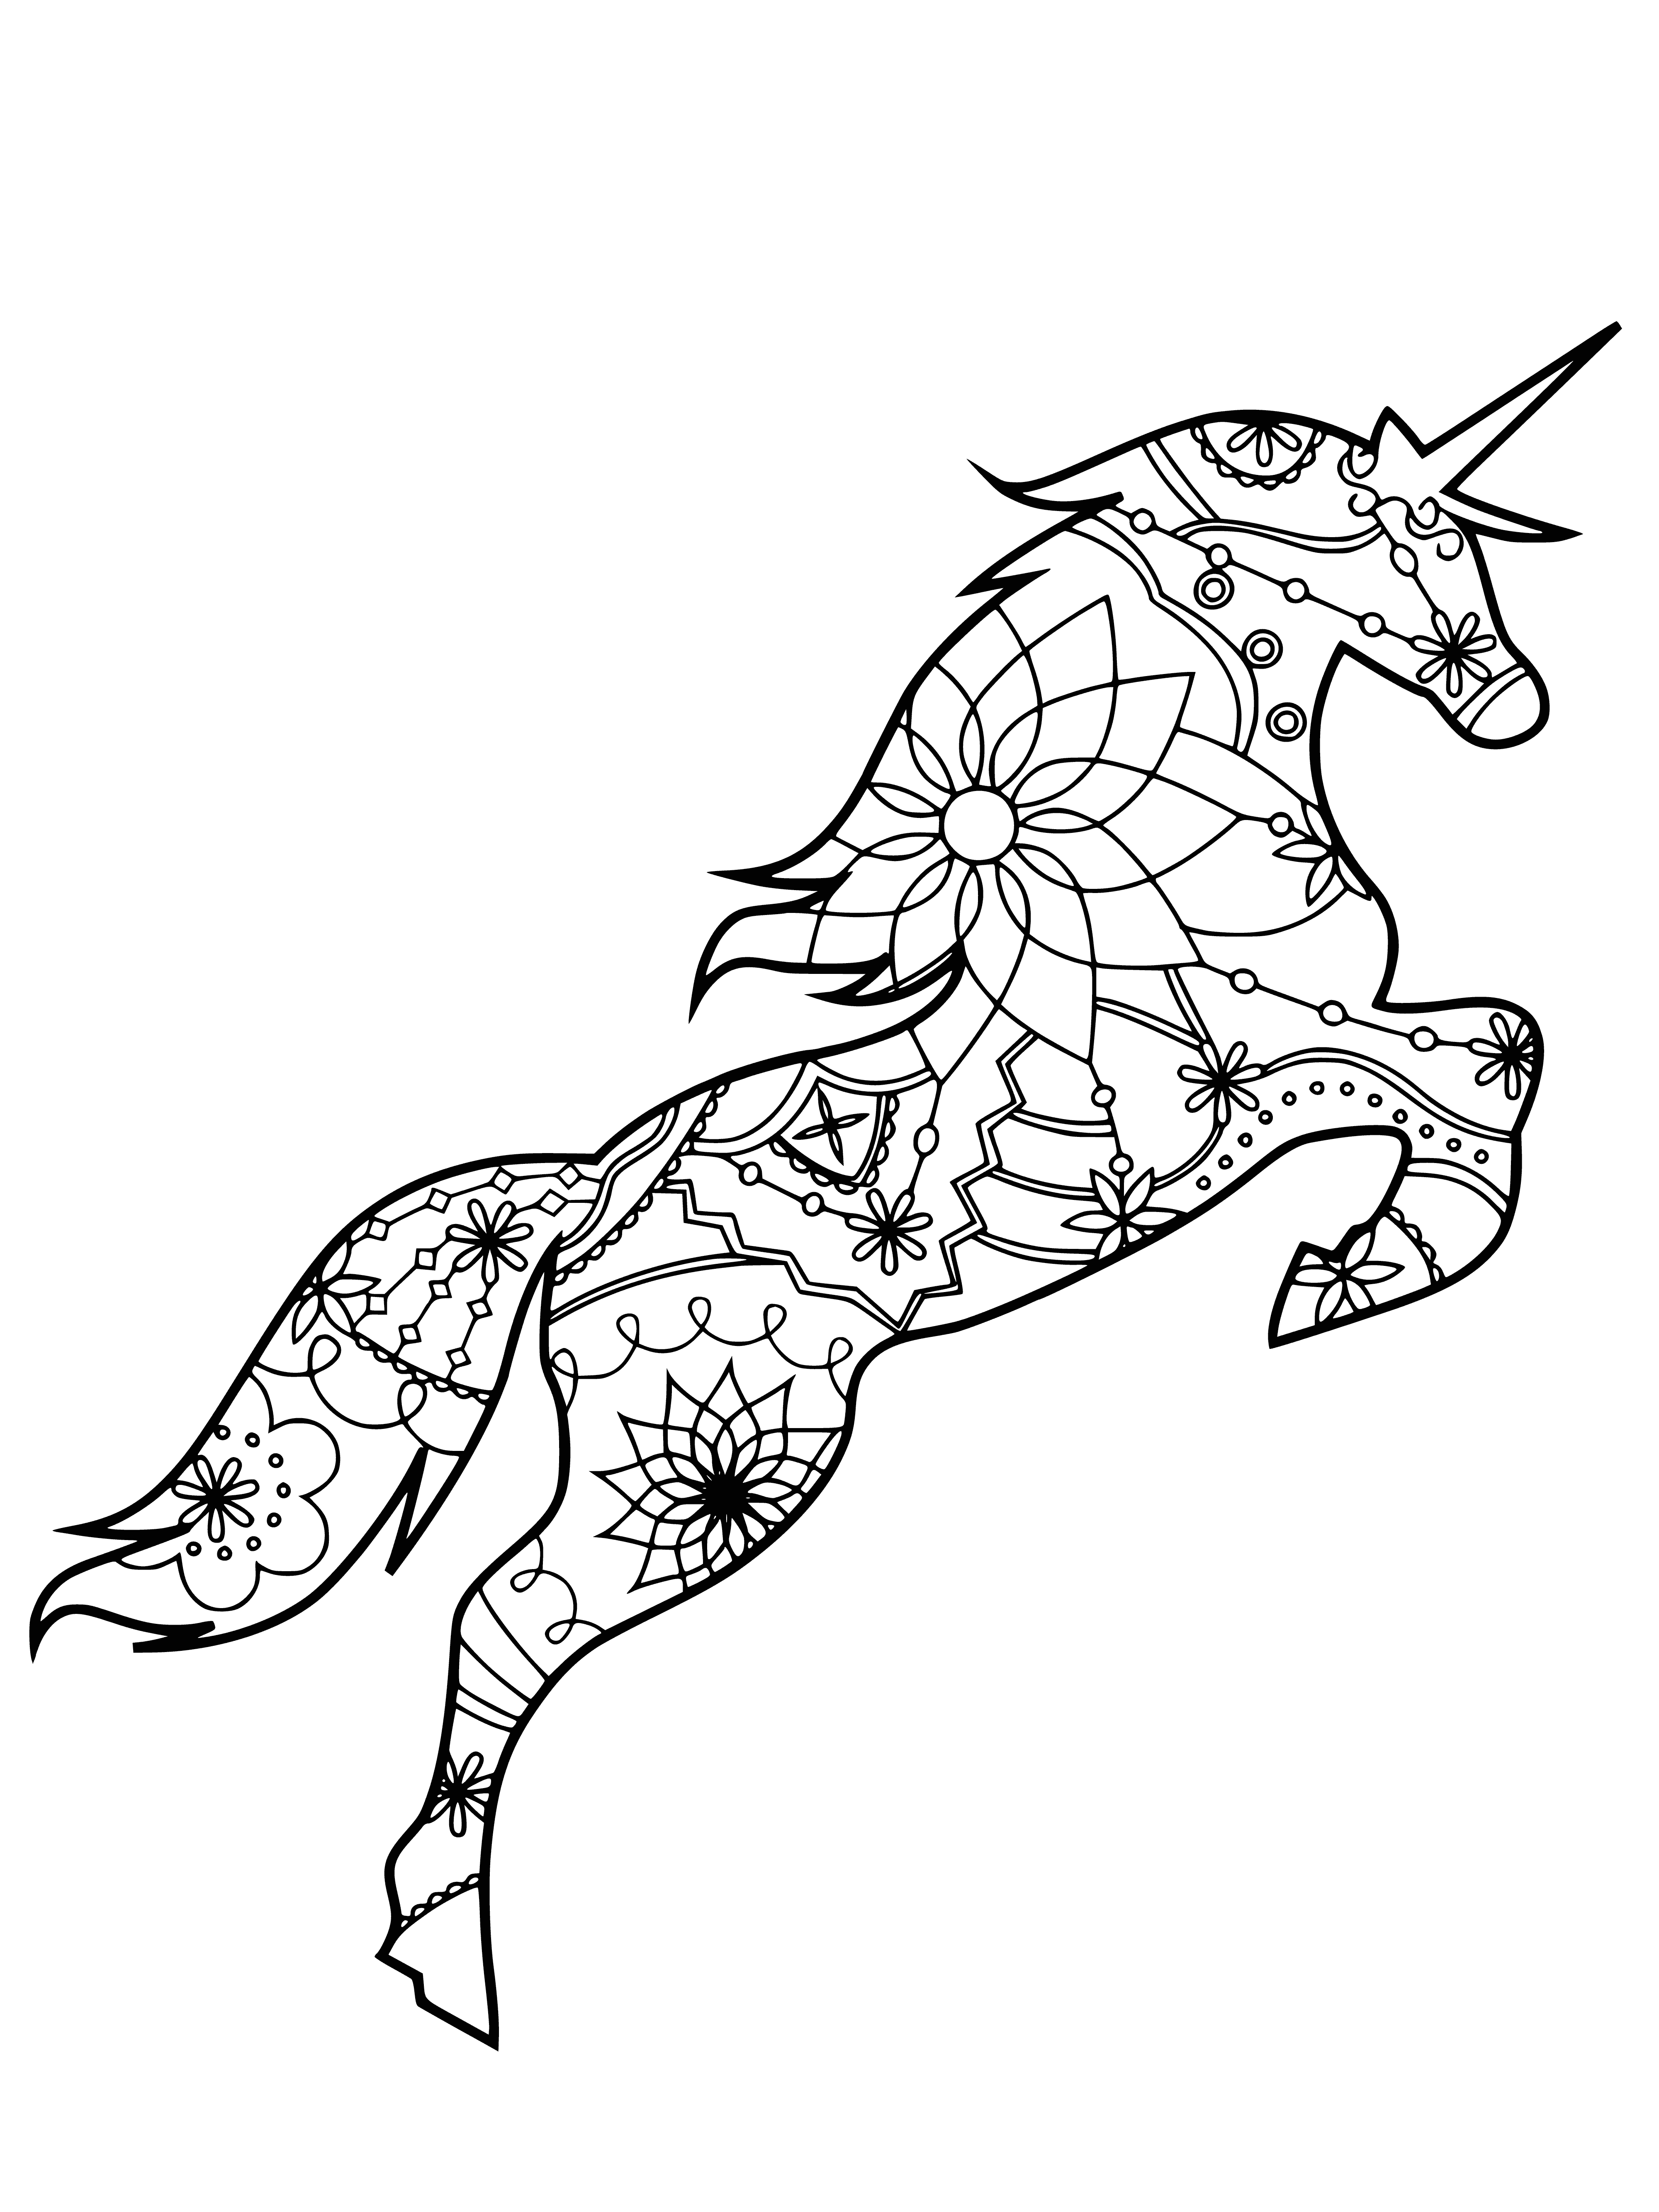 coloring page: Coloring page of white unicorn with long horn standing on green hill surrounded by blue sky and trees. #coloring #unicorns #hills